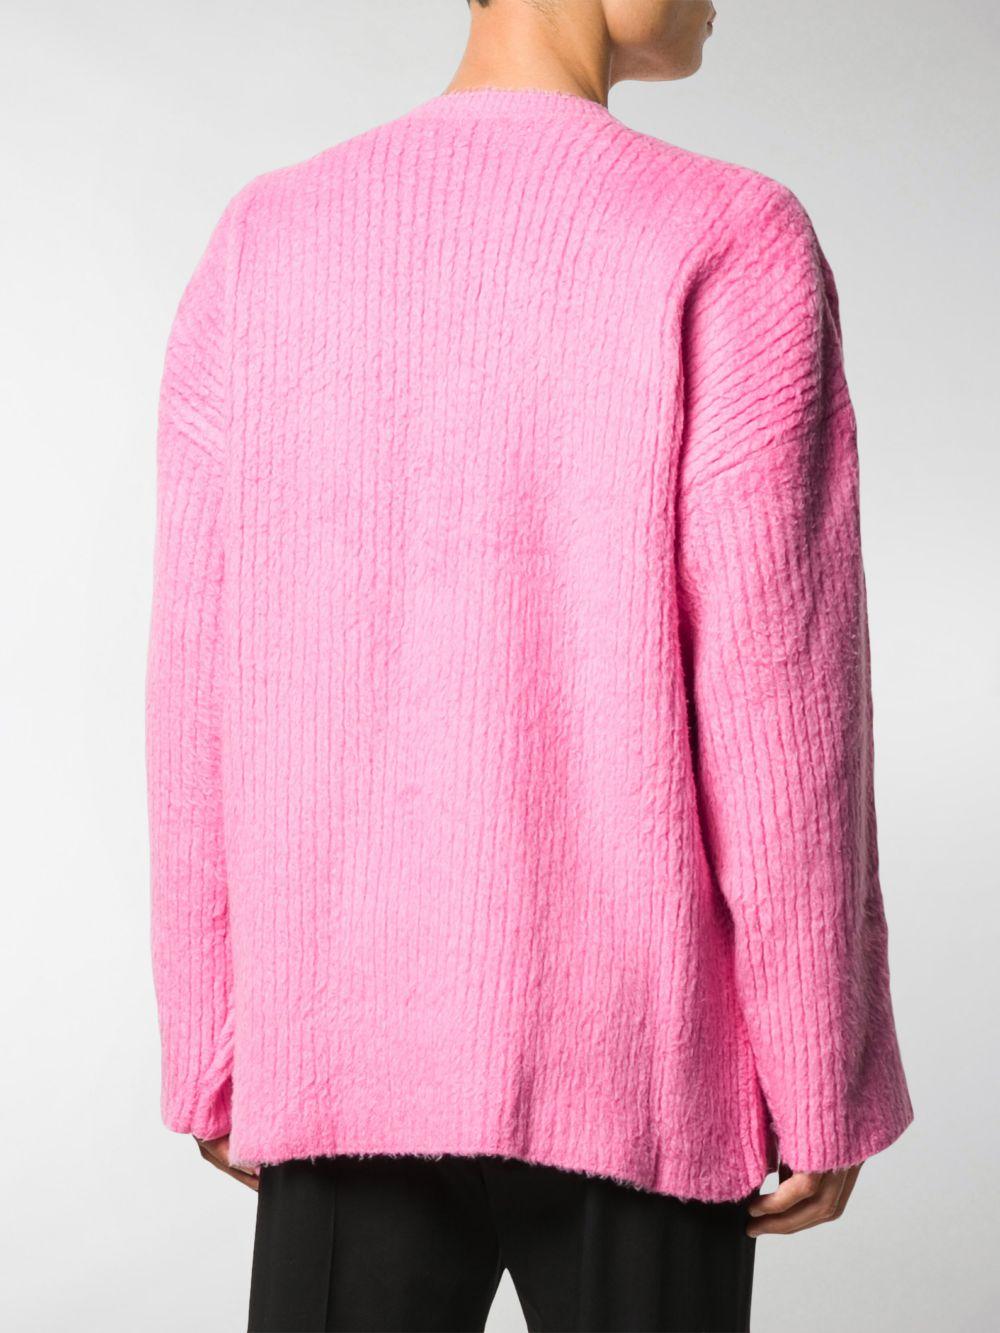 Balenciaga Cotton Oversized Logo-embroidered Jumper in Pink for Men - Lyst